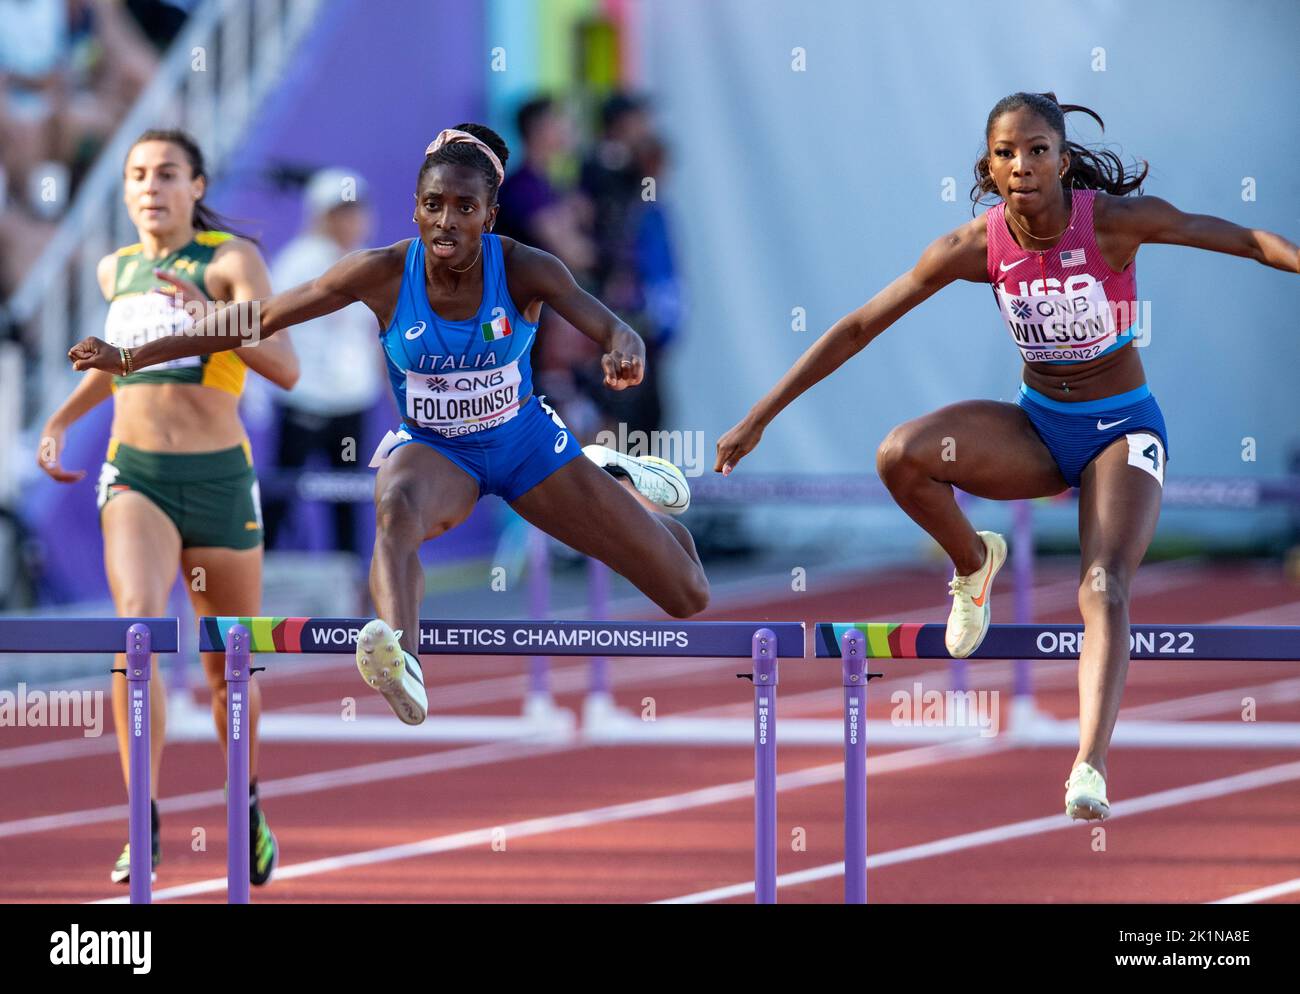 Ayomide Folorunso of Italy and Britton Wilson of the USA competing in the women’s 400m hurdles at the World Athletics Championships, Hayward Field, Eu Stock Photo